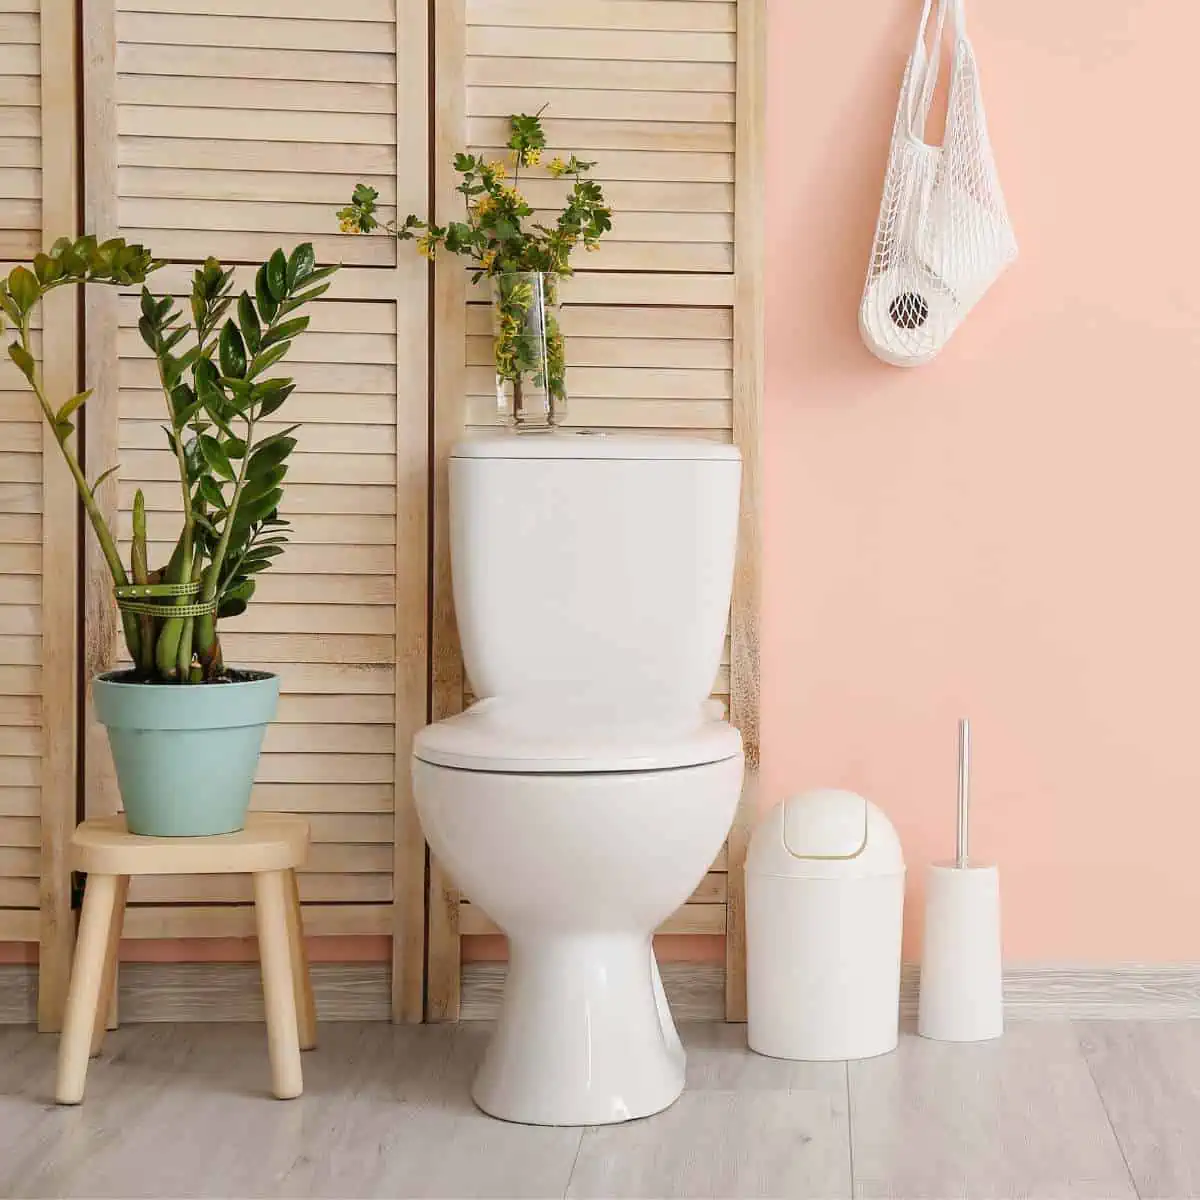 Cruelty-free bathroom with a toilet, plants, and cleaning brush.